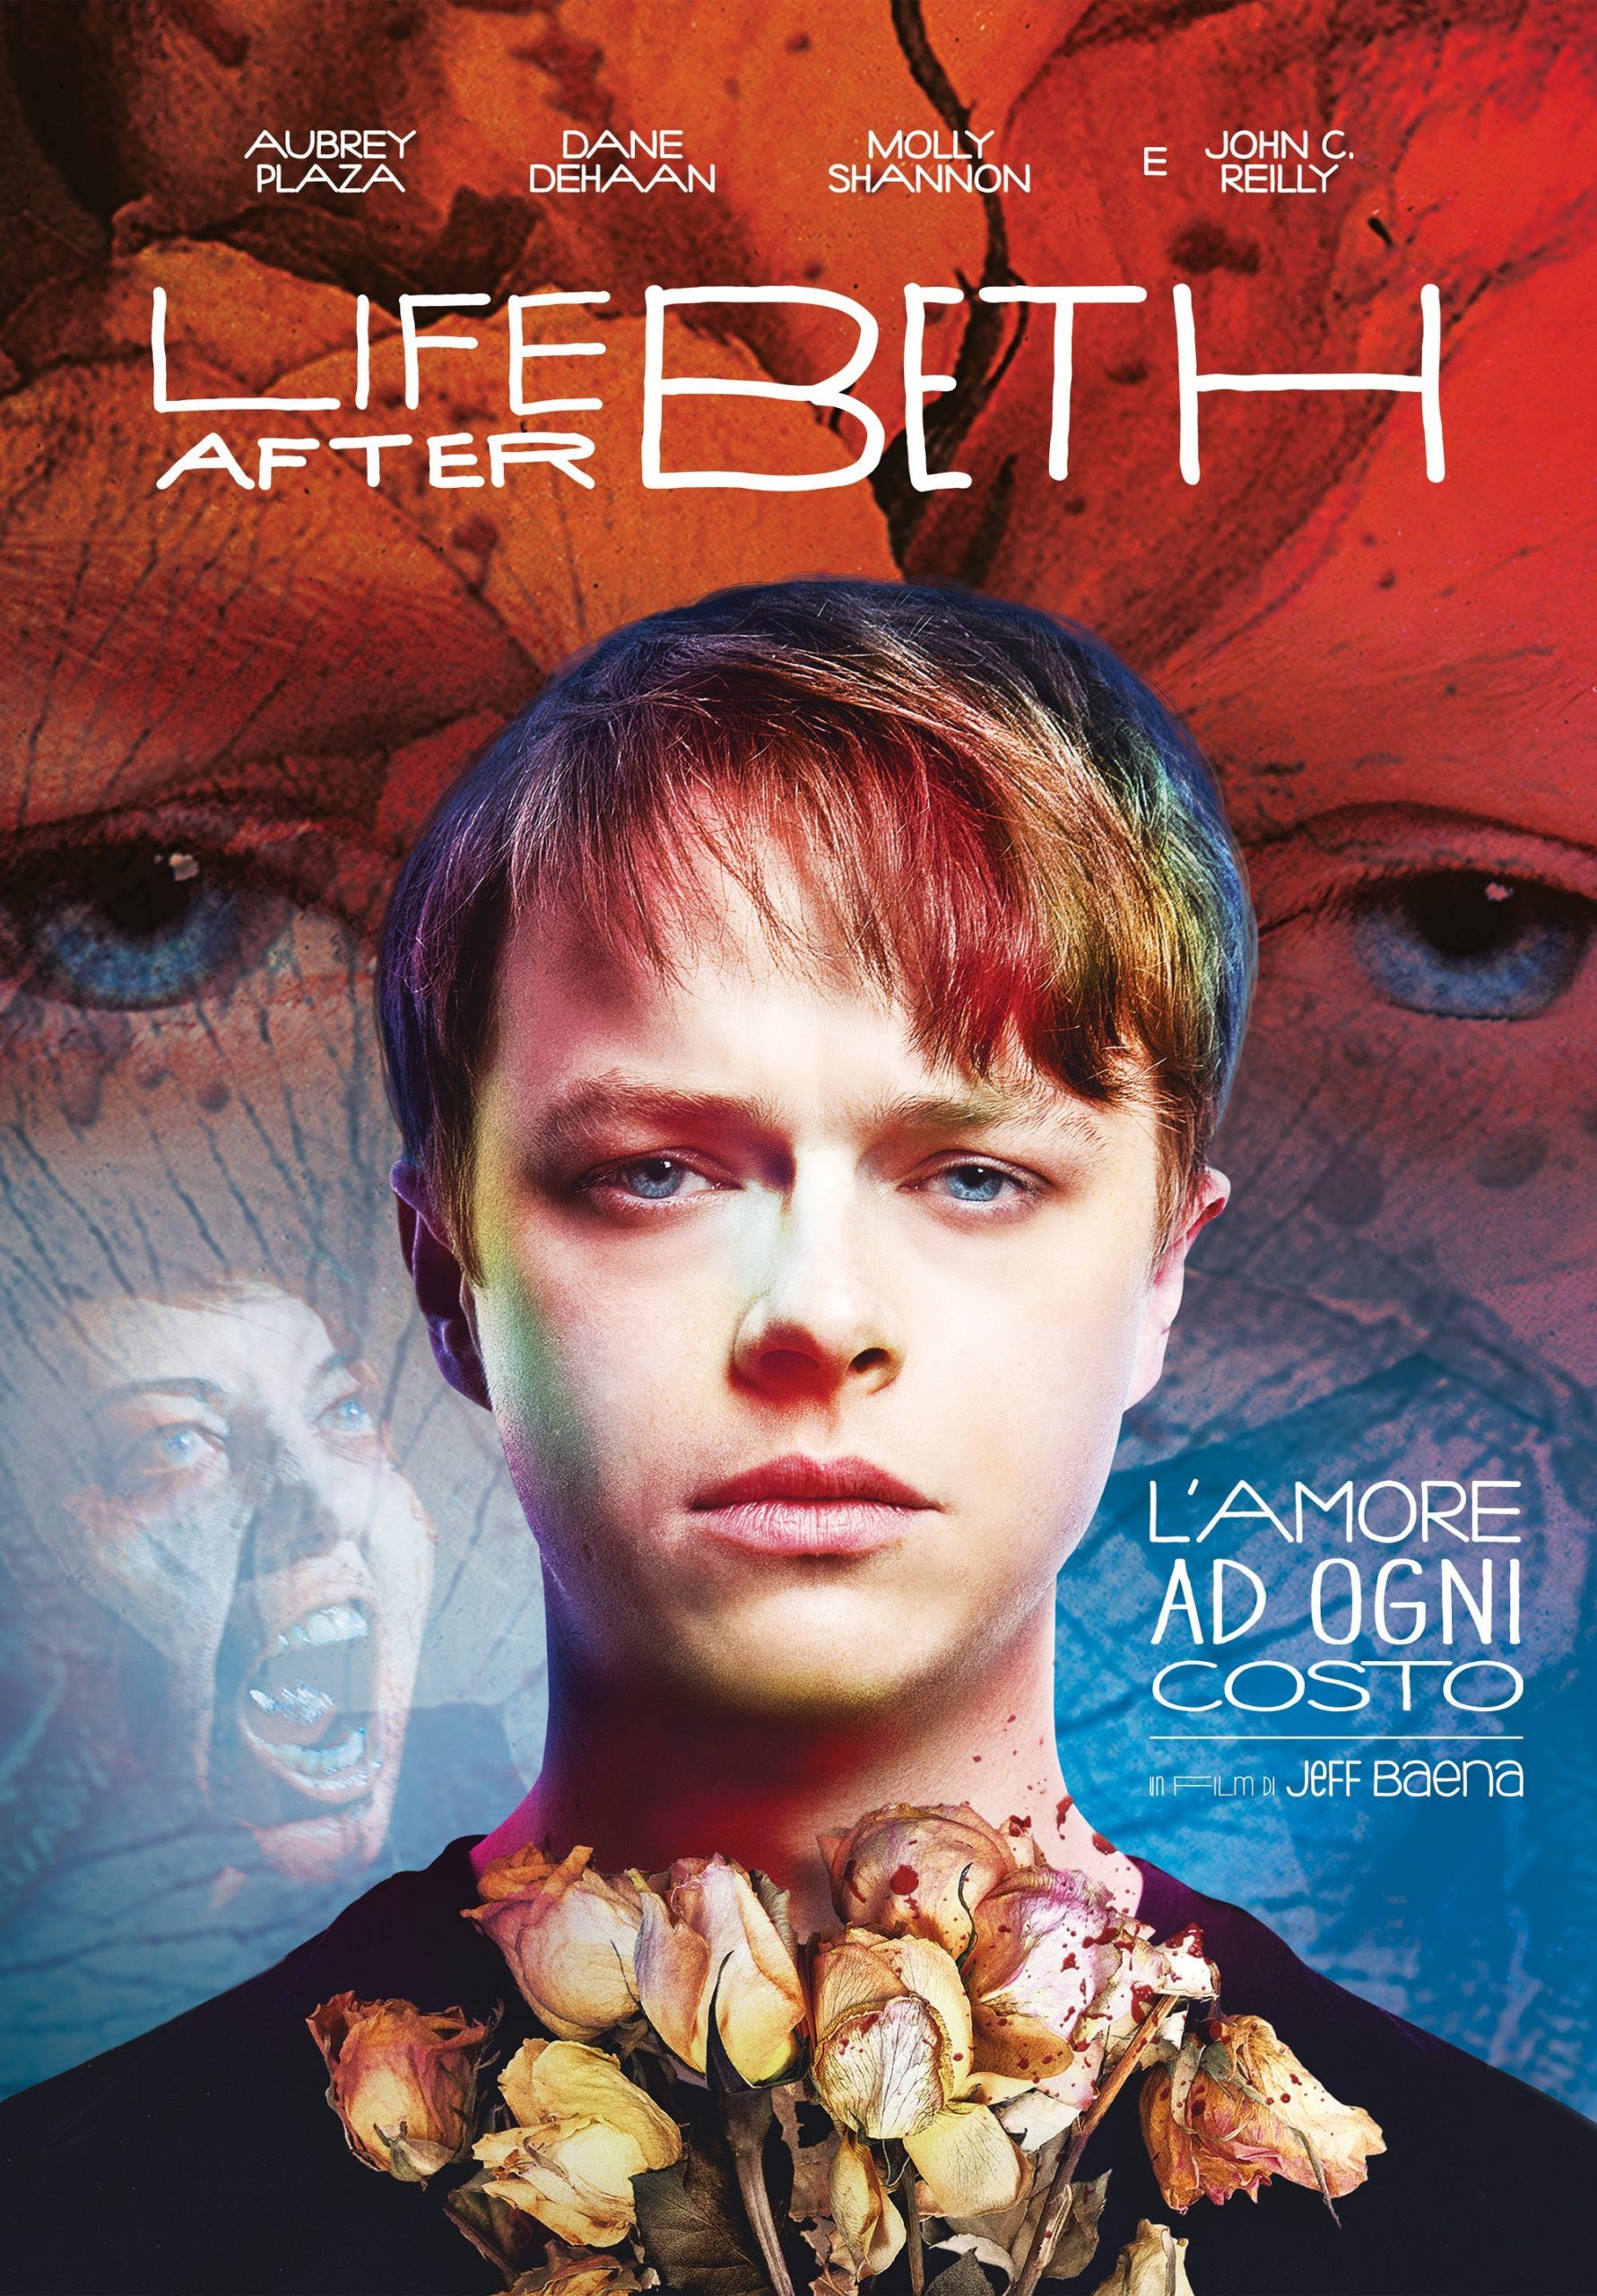 Life after Beth – L’amore ad ogni costo [HD] (2014)